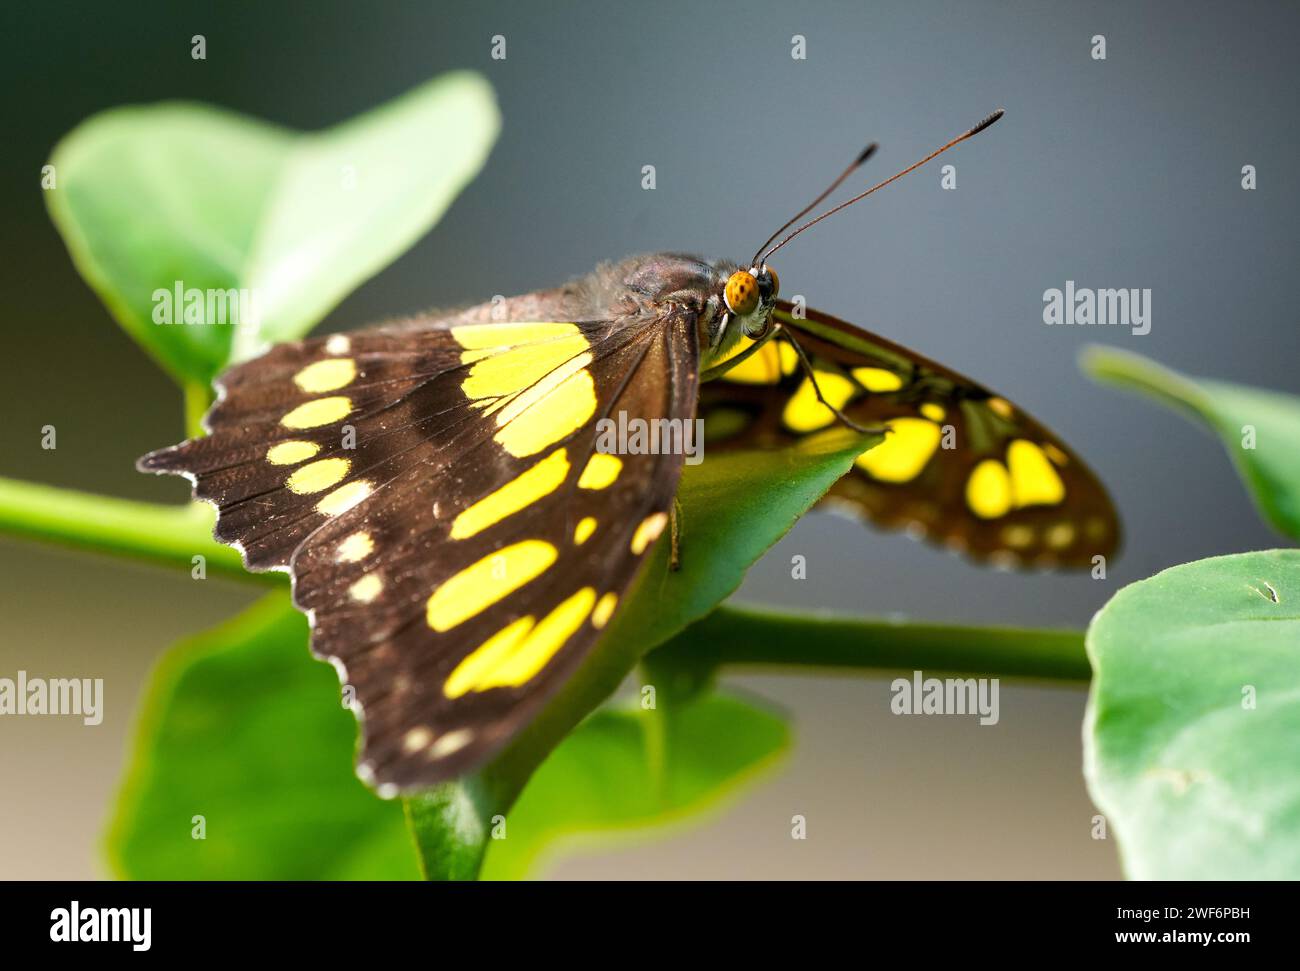 Malachite butterfly on a plant. Insect in natural environment close-up. Siproeta stelenes. Stock Photo